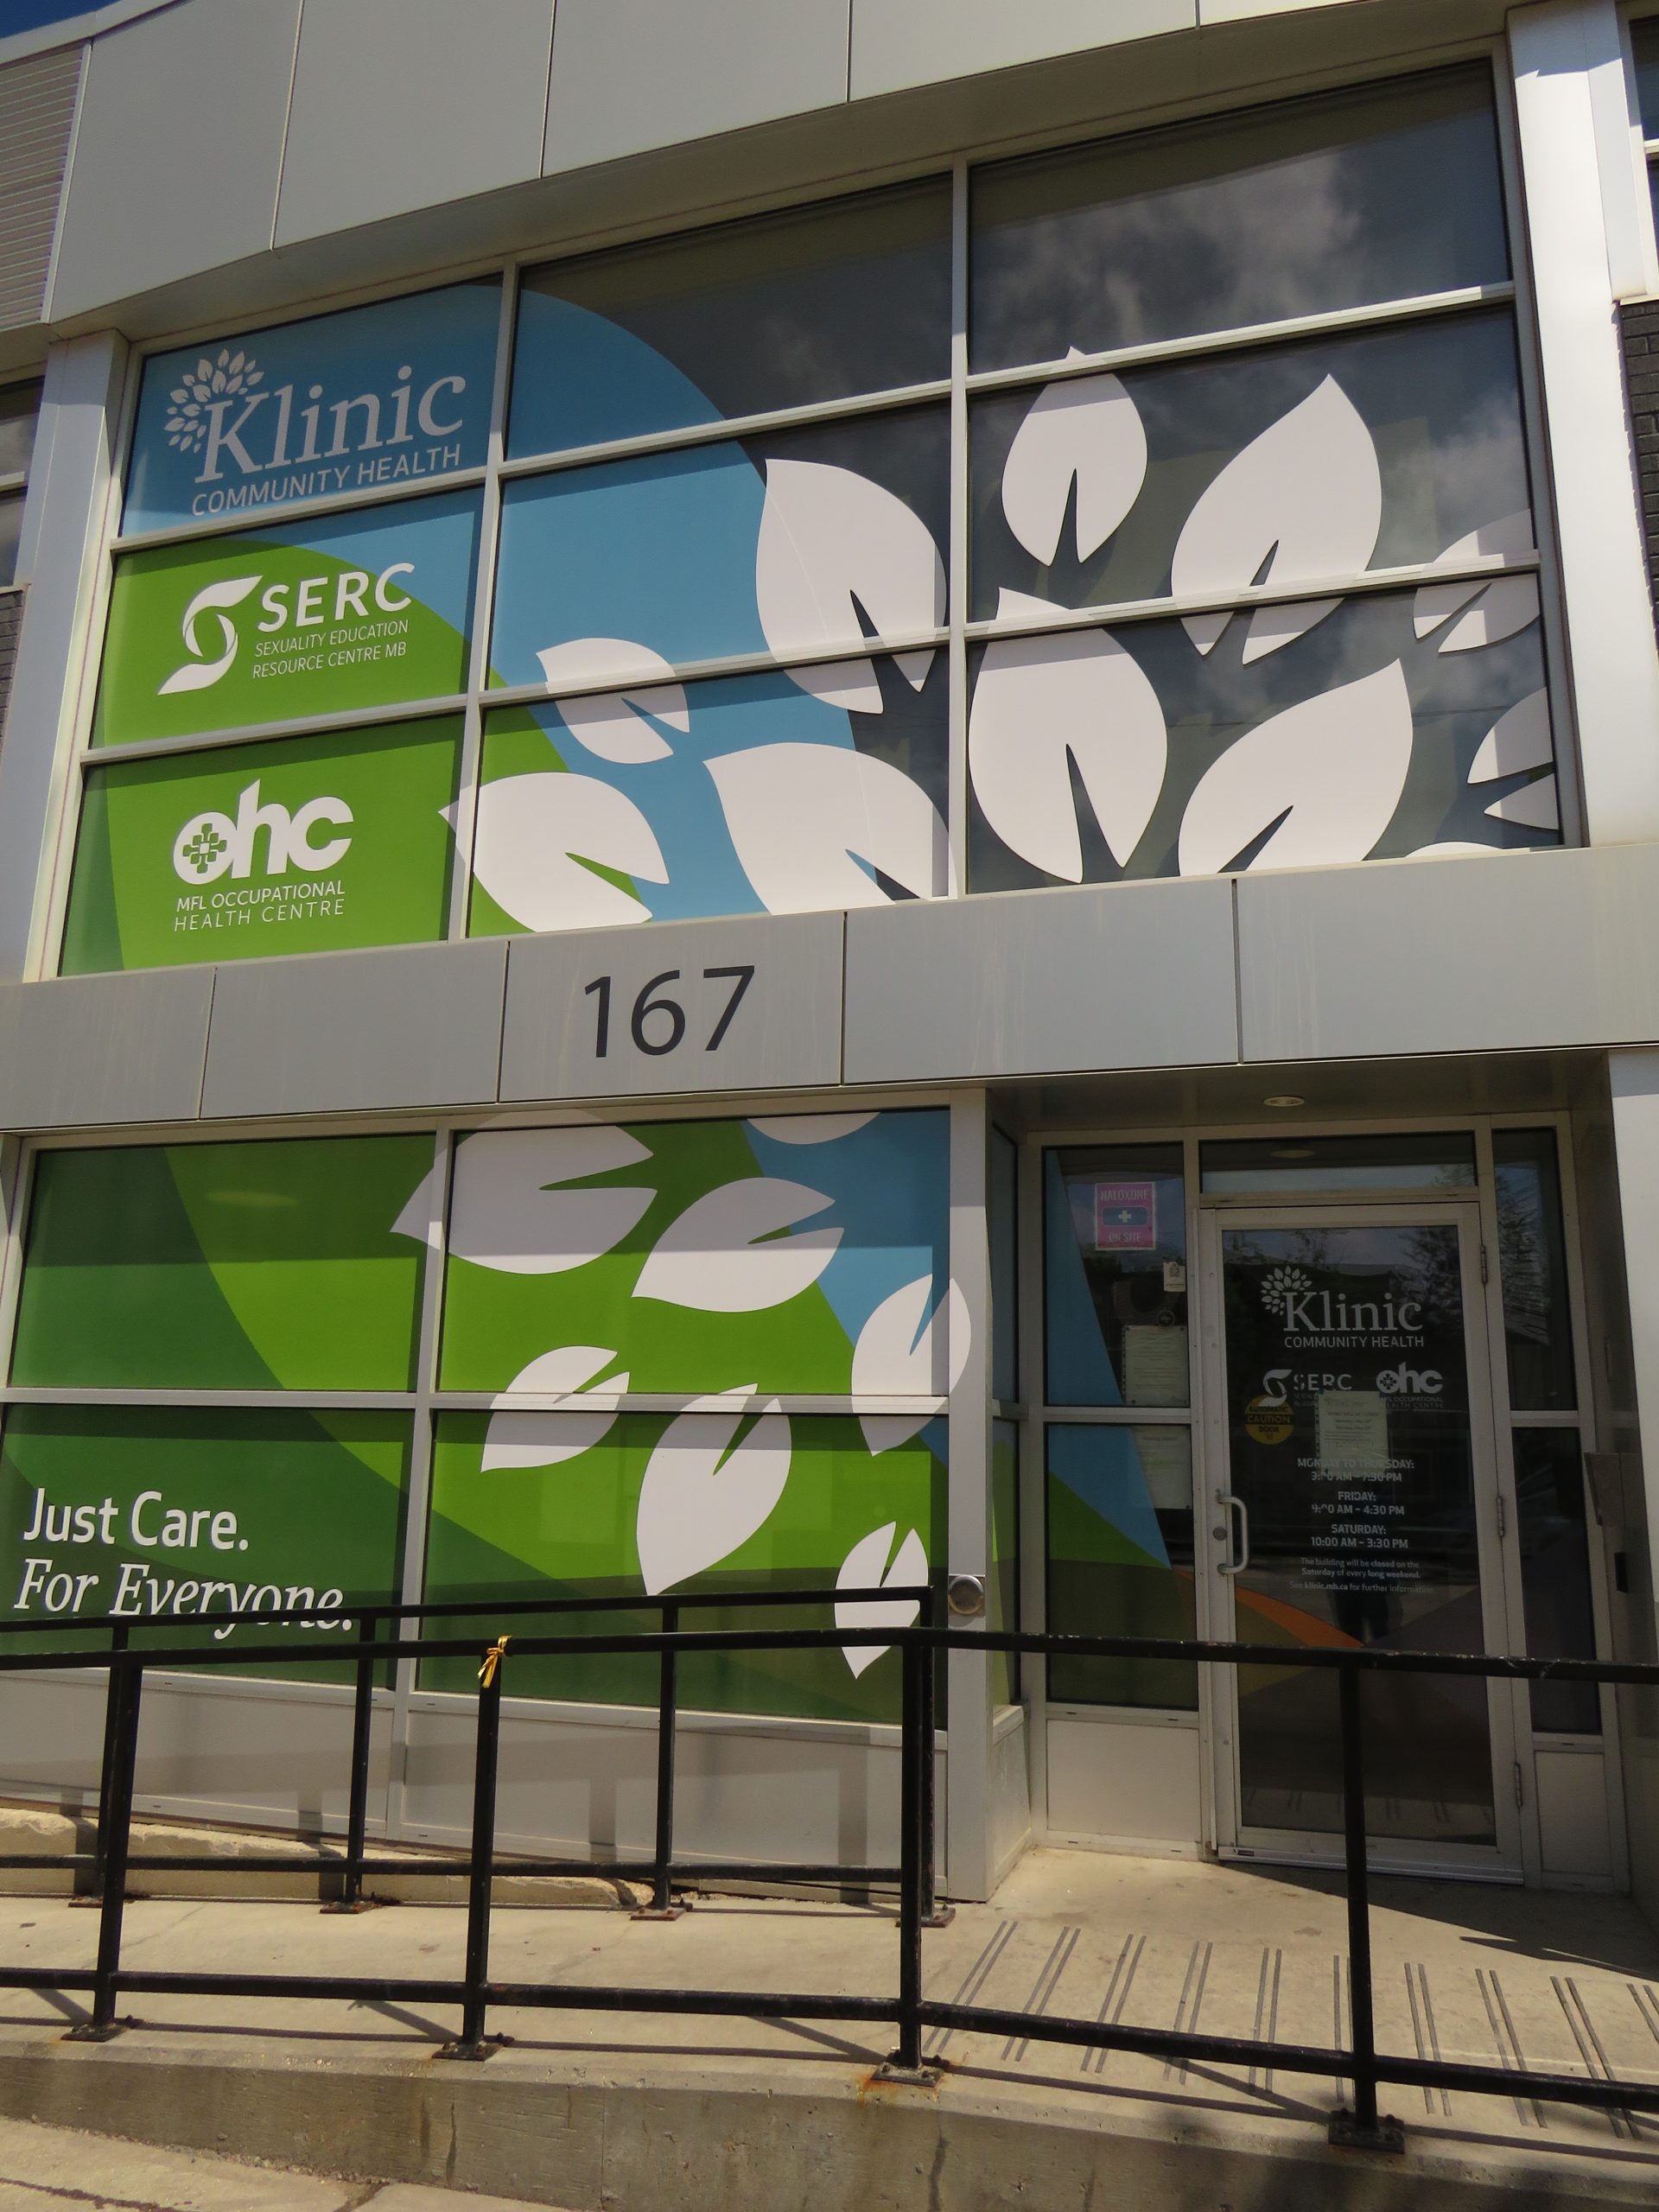 A closeup of the exterior of 167 Sherbrook St. There is a large green and blue sign in the window listing the organisations in the building, Klinic, SERC, and OHC.